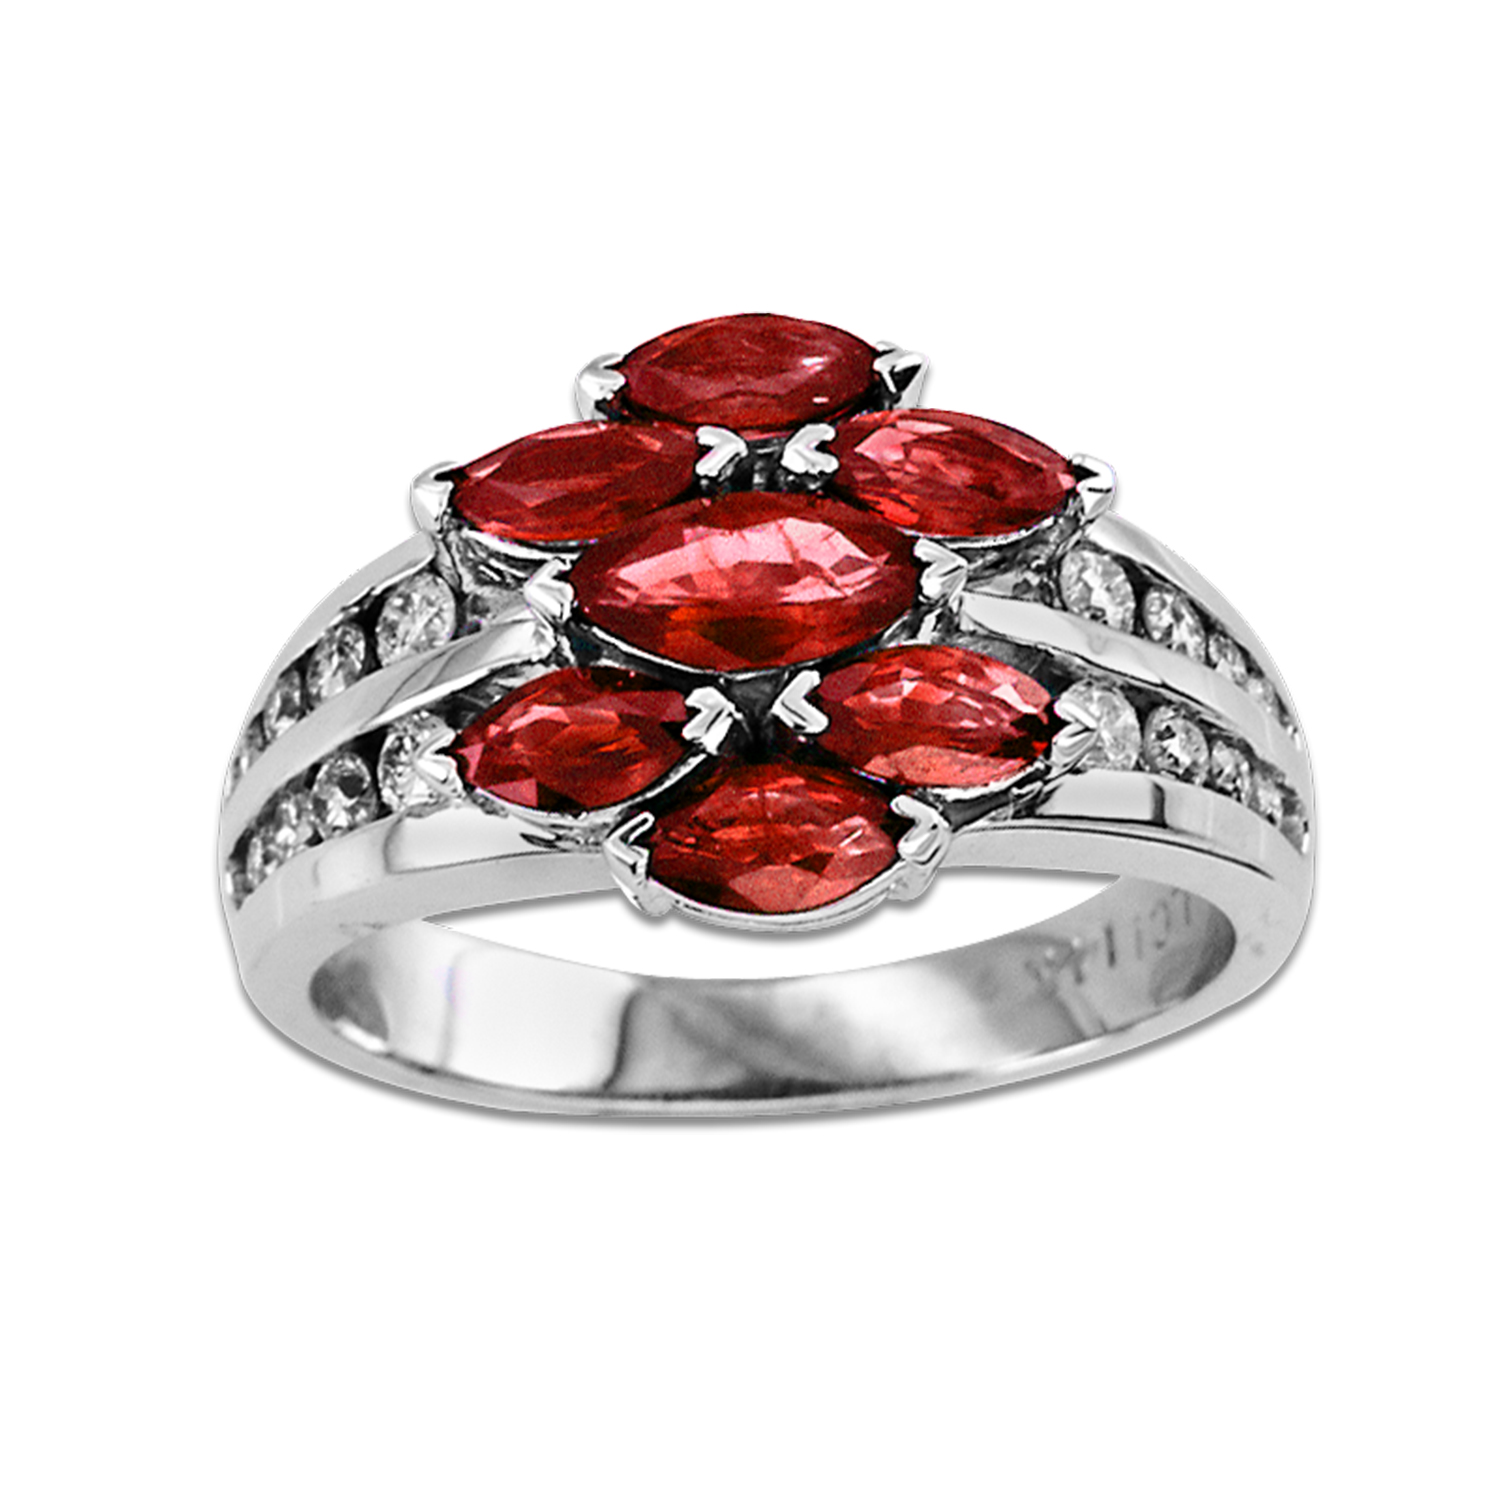 View 0.35ctw Diamond and Ruby Ring in 14k Gold